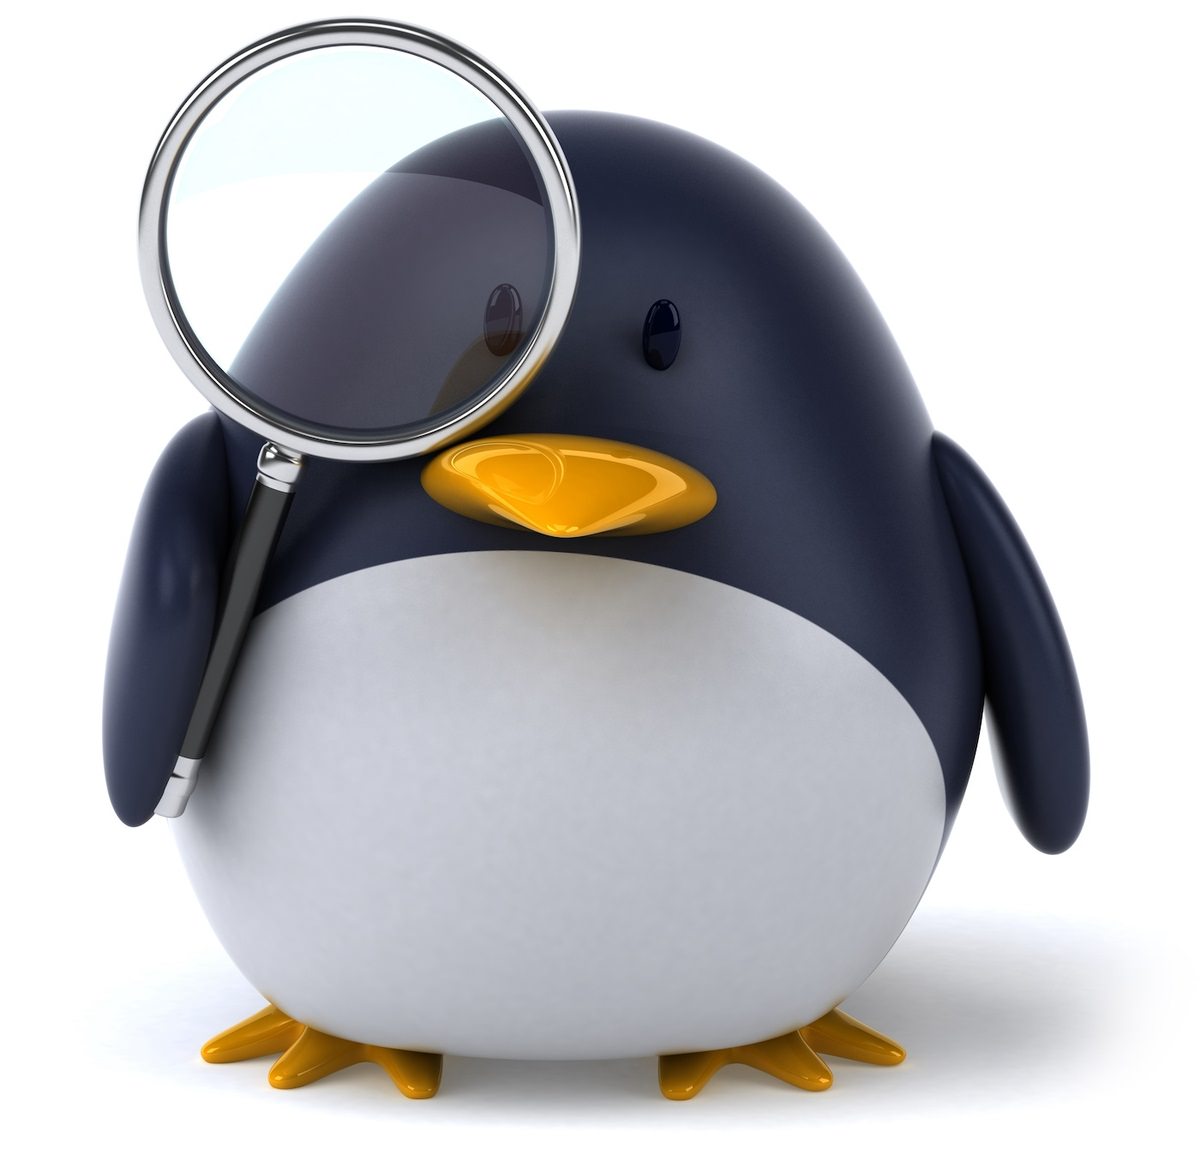 Installing the program in Linux distributions